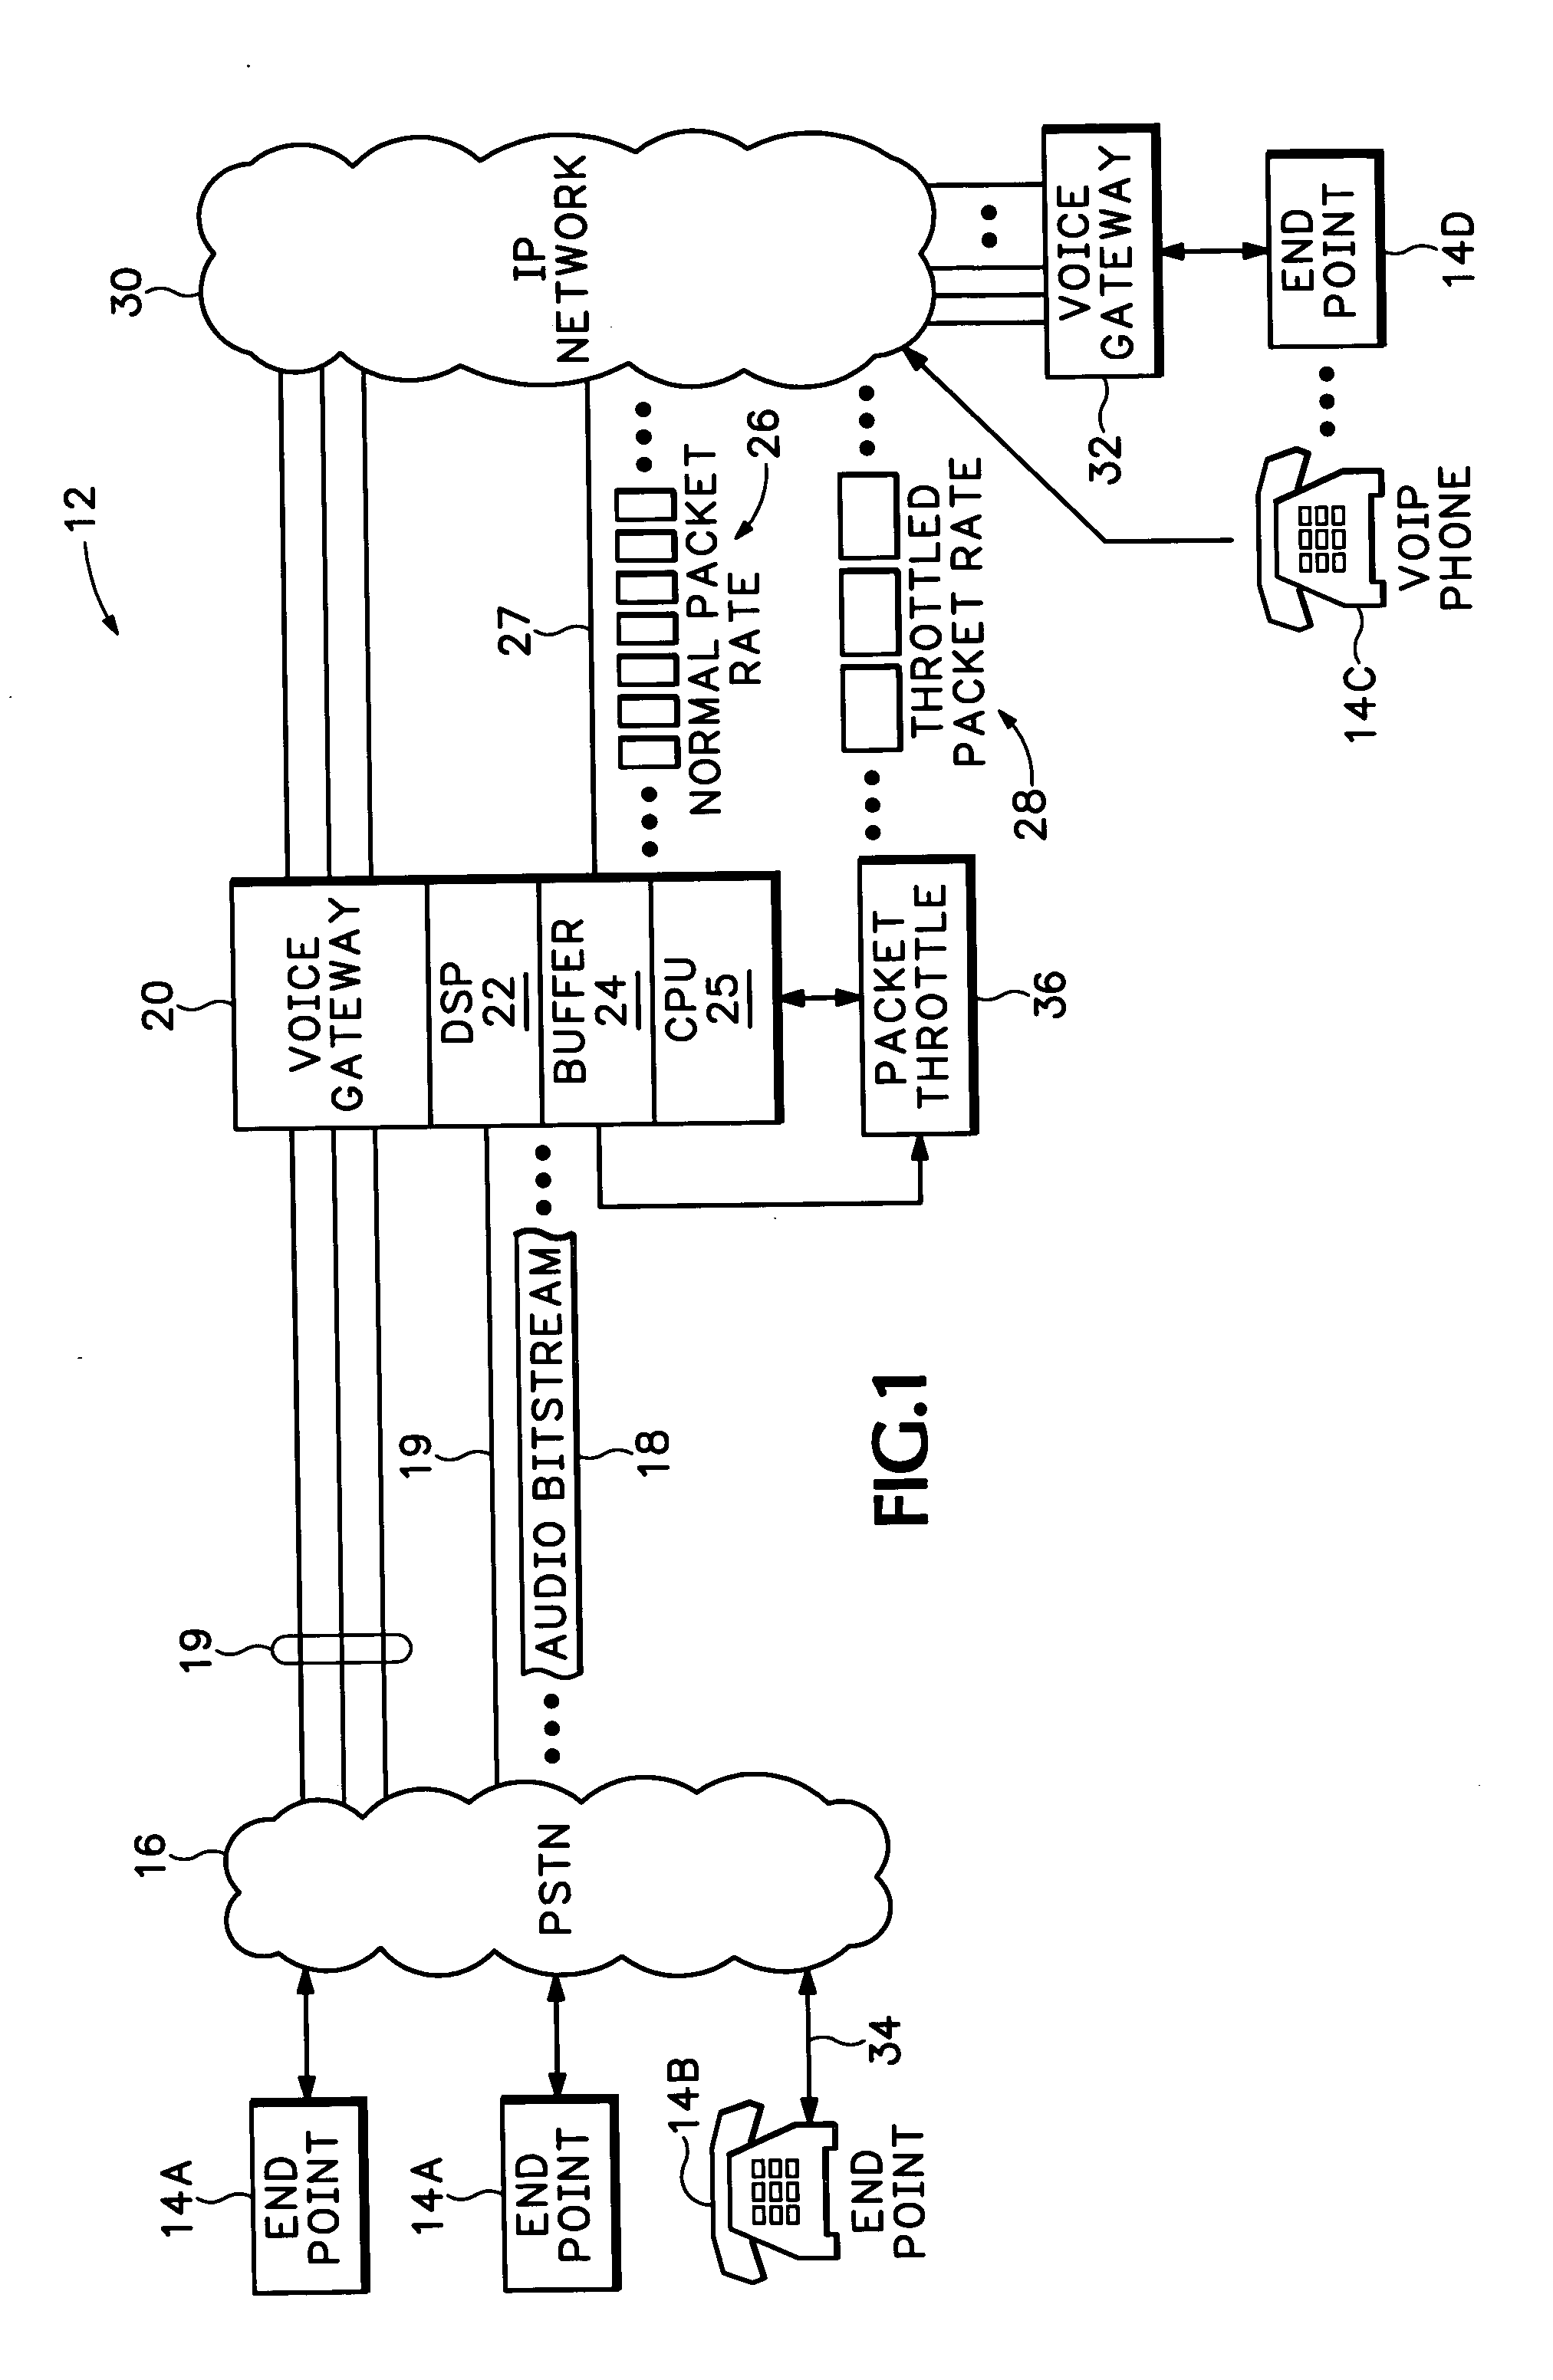 Method and apparatus for throttling audio packets according to gateway processing capacity